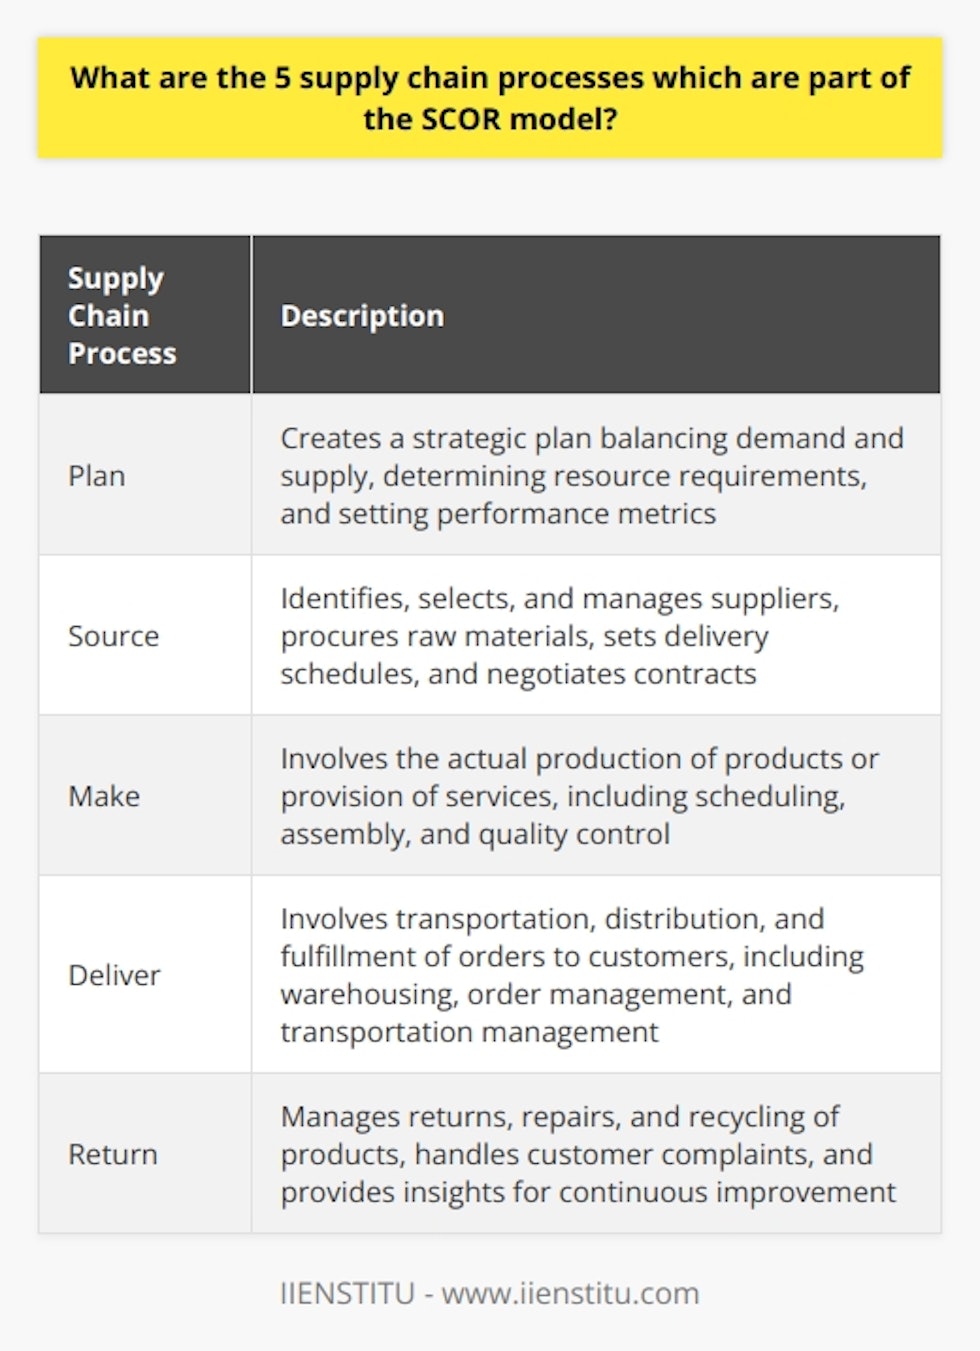 The SCOR model, or Supply Chain Operations Reference model, is a framework that helps businesses improve their supply chain operations by identifying gaps and suggesting improvements. It consists of five primary supply chain processes: Plan, Source, Make, Deliver, and Return.The planning process involves creating a strategic plan that balances demand and supply, determines resource requirements, and sets performance metrics. This helps organizations allocate resources effectively and manage potential risks.The sourcing process focuses on identifying, selecting, and managing suppliers. This includes procuring raw materials, setting delivery schedules, and negotiating contracts. Streamlining the sourcing process leads to strong supplier relationships and better quality, cost-effective products.The making process involves the actual production of products or provision of services. This includes activities such as scheduling production, assembling goods, and ensuring quality control. An efficient making process allows businesses to meet customer demand while maintaining high-quality standards and controlling production costs.The delivery process, also known as the logistics process, involves the transportation, distribution, and fulfillment of orders to customers. This includes warehousing, order management, and transportation management. Effective delivery management ensures timely and accurate deliveries, leading to increased customer satisfaction and loyalty.Lastly, the return process involves managing returns, repairs, and recycling of products. This process is crucial for handling customer complaints, processing refunds or replacements, and maintaining a positive brand image. The return process also provides valuable insights for continuous improvement in product design and manufacturing.In conclusion, the SCOR model captures the five primary supply chain processes to help businesses analyze and optimize their operations for a competitive advantage. By focusing on planning, sourcing, making, delivering, and returning, organizations can streamline their supply chain, minimize costs, and enhance customer satisfaction.